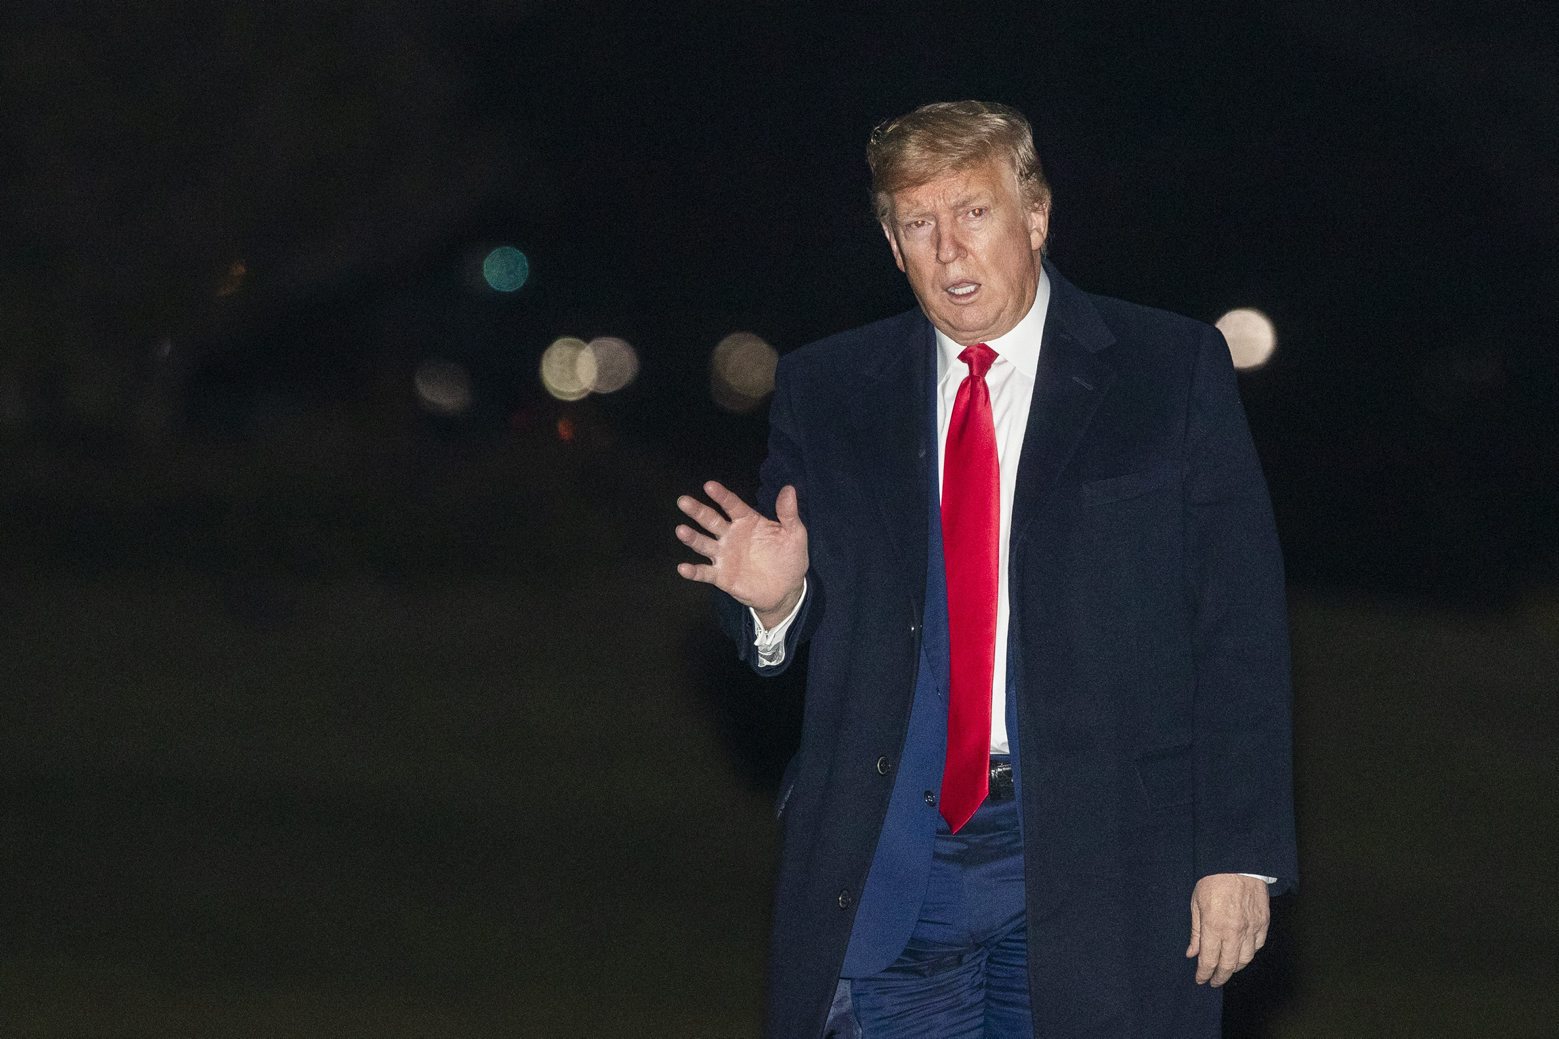 President Donald Trump waves upon arrival at the White House, Wednesday, Jan. 22, 2020, in Washington, from the World Economic Forum in Davos, Switzerland, (AP Photo/Manuel Balce Ceneta)
Donald Trump Trump